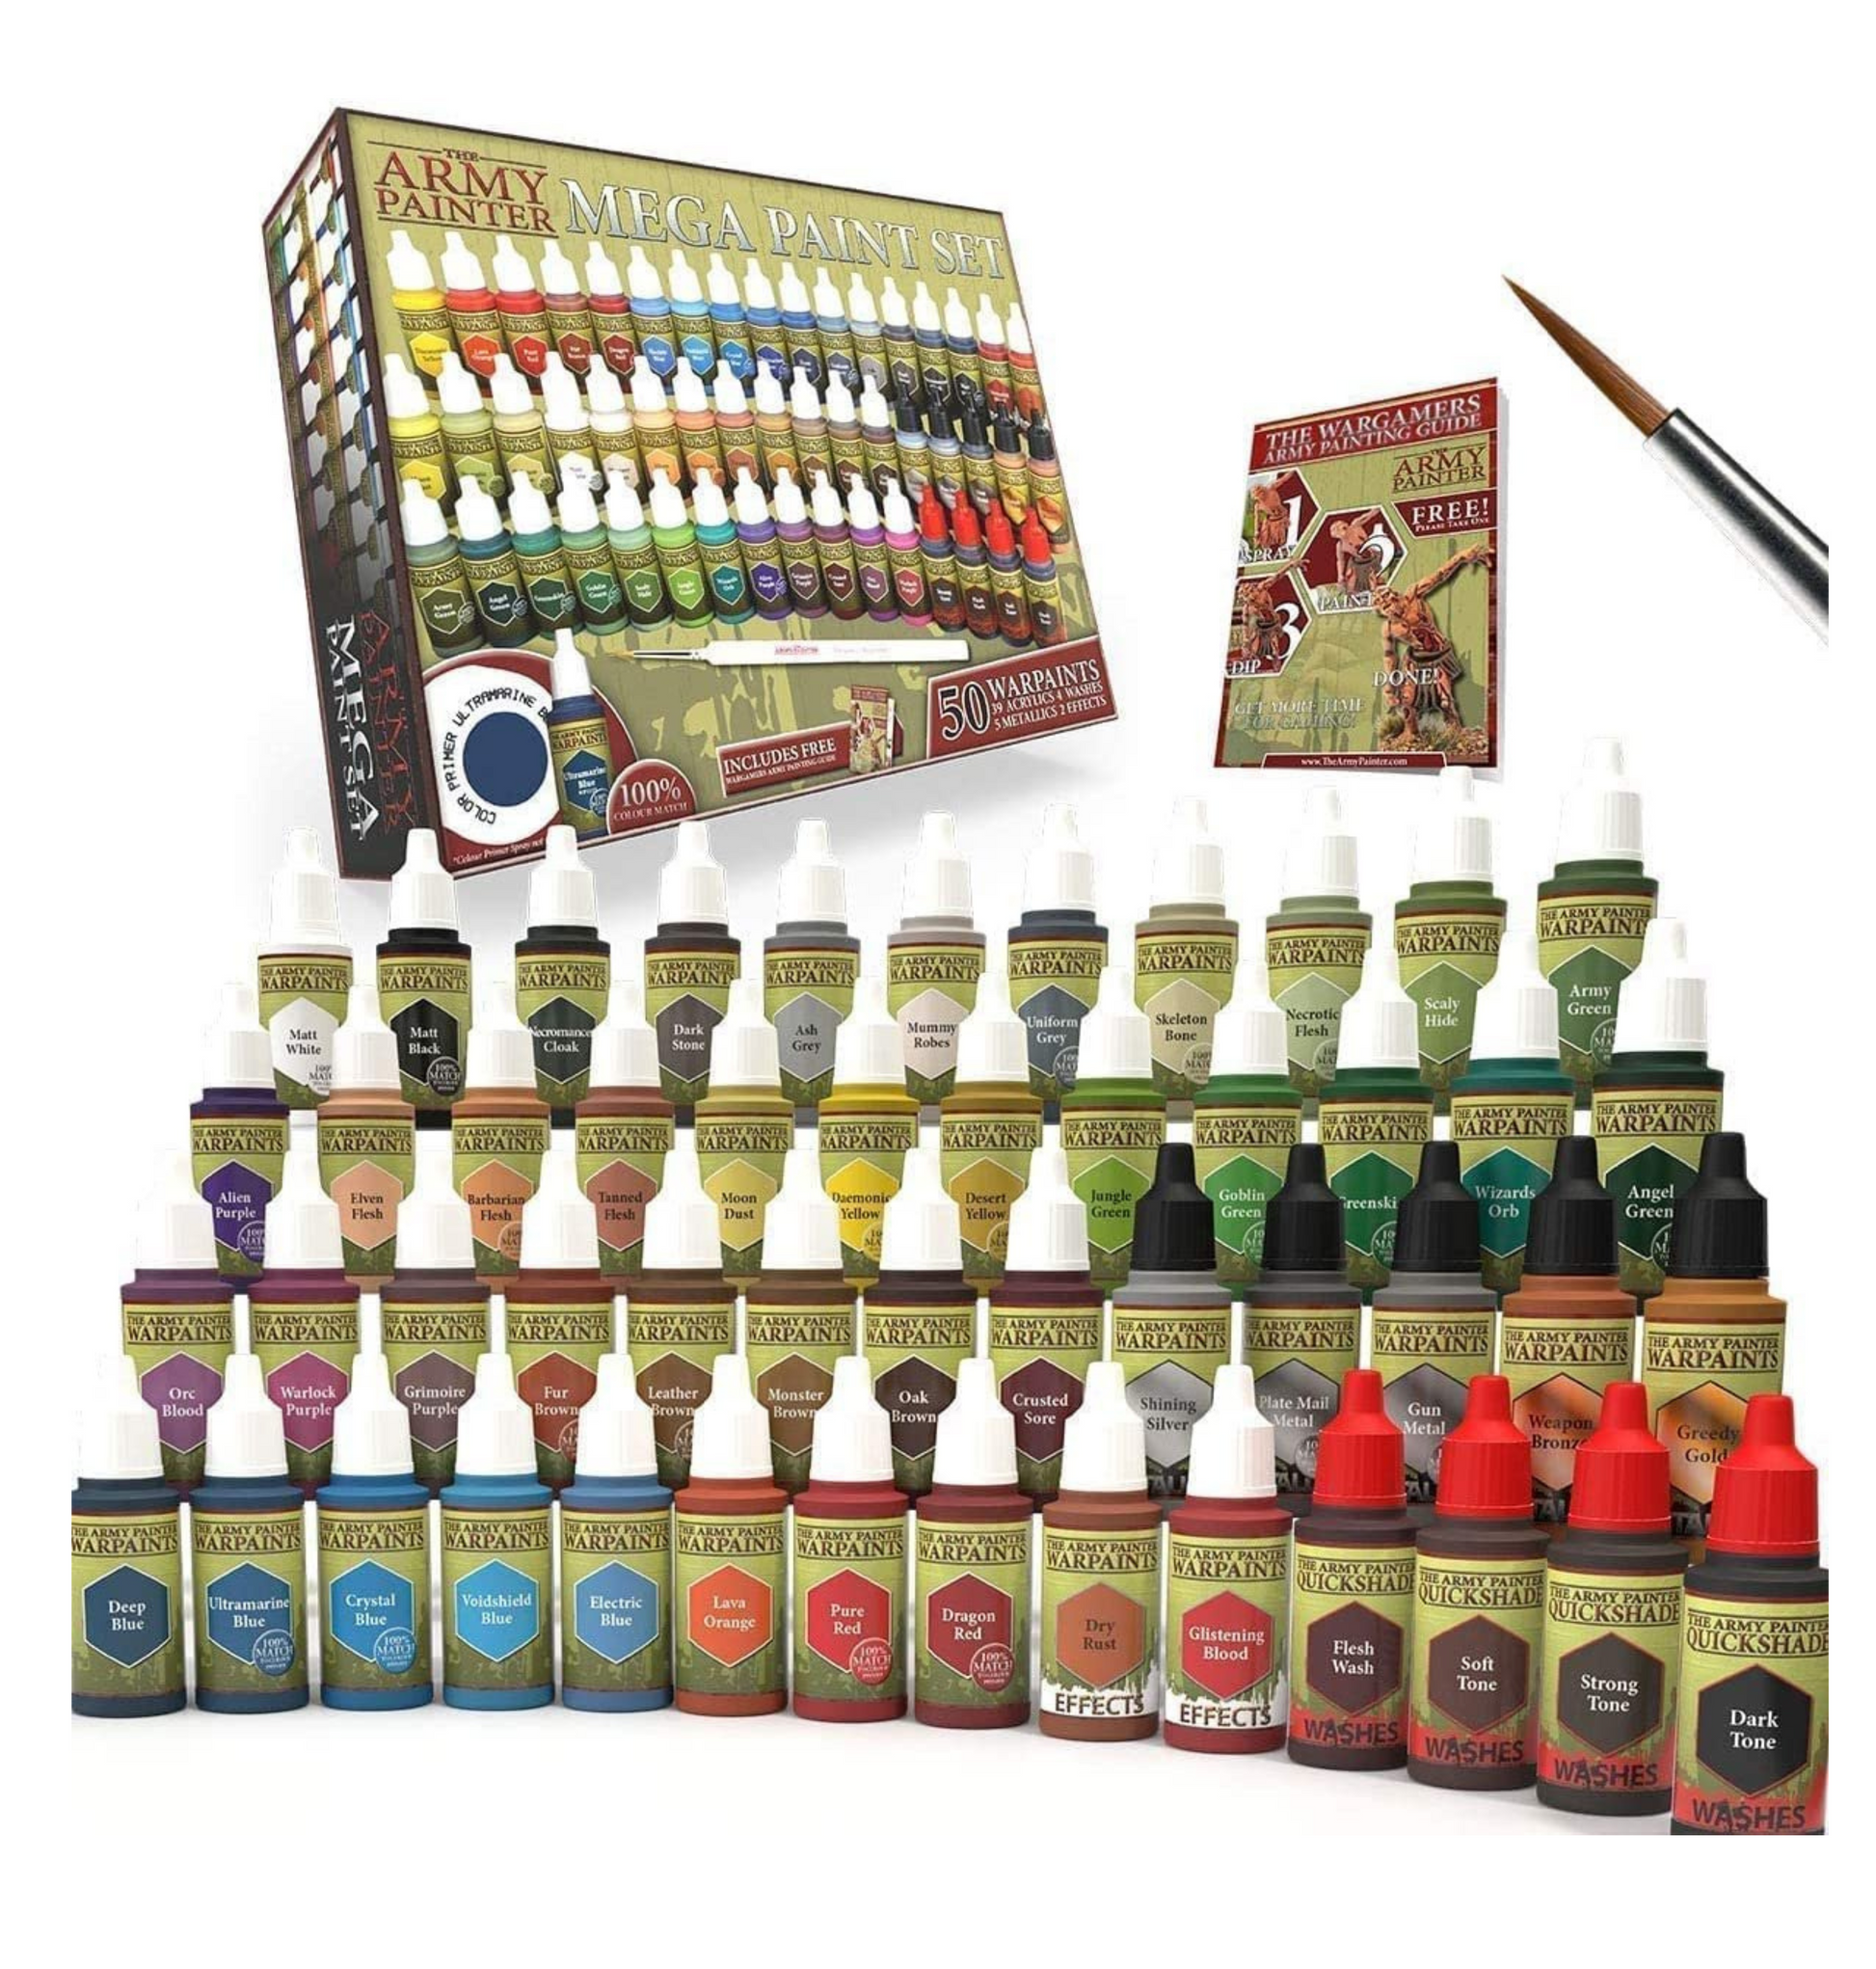 The Army Painter Paint Set - Miniature Painting Kit with 100 Rustproof  Mixing Balls & 60 Nontoxic Acrylic Paints for Wargamers Hobby Model Paints  for